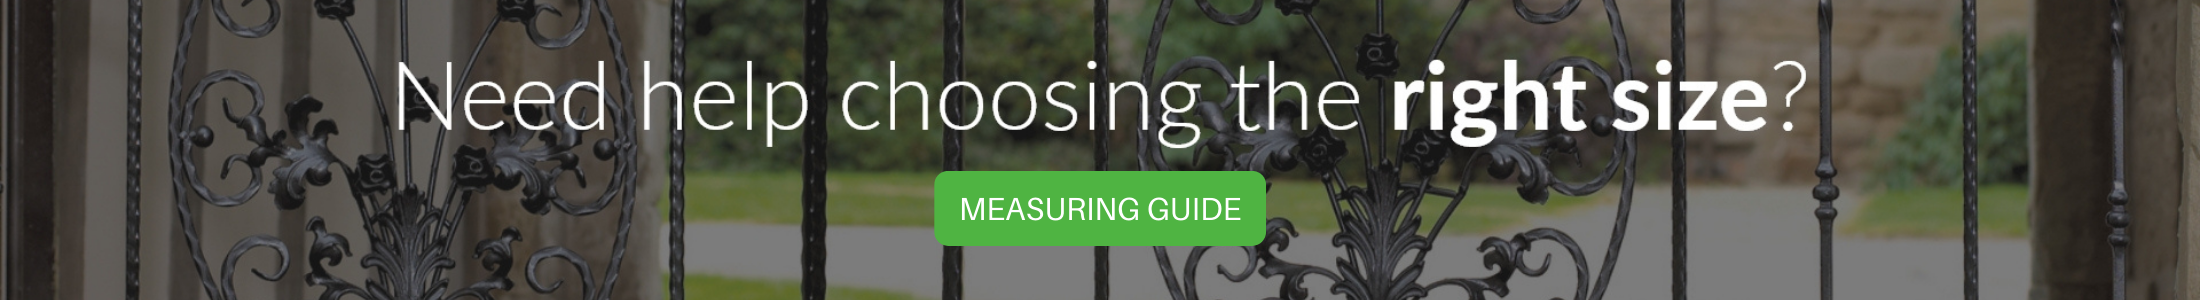 Go to the measuring guide if you need help and guidance relating to ordering sizes